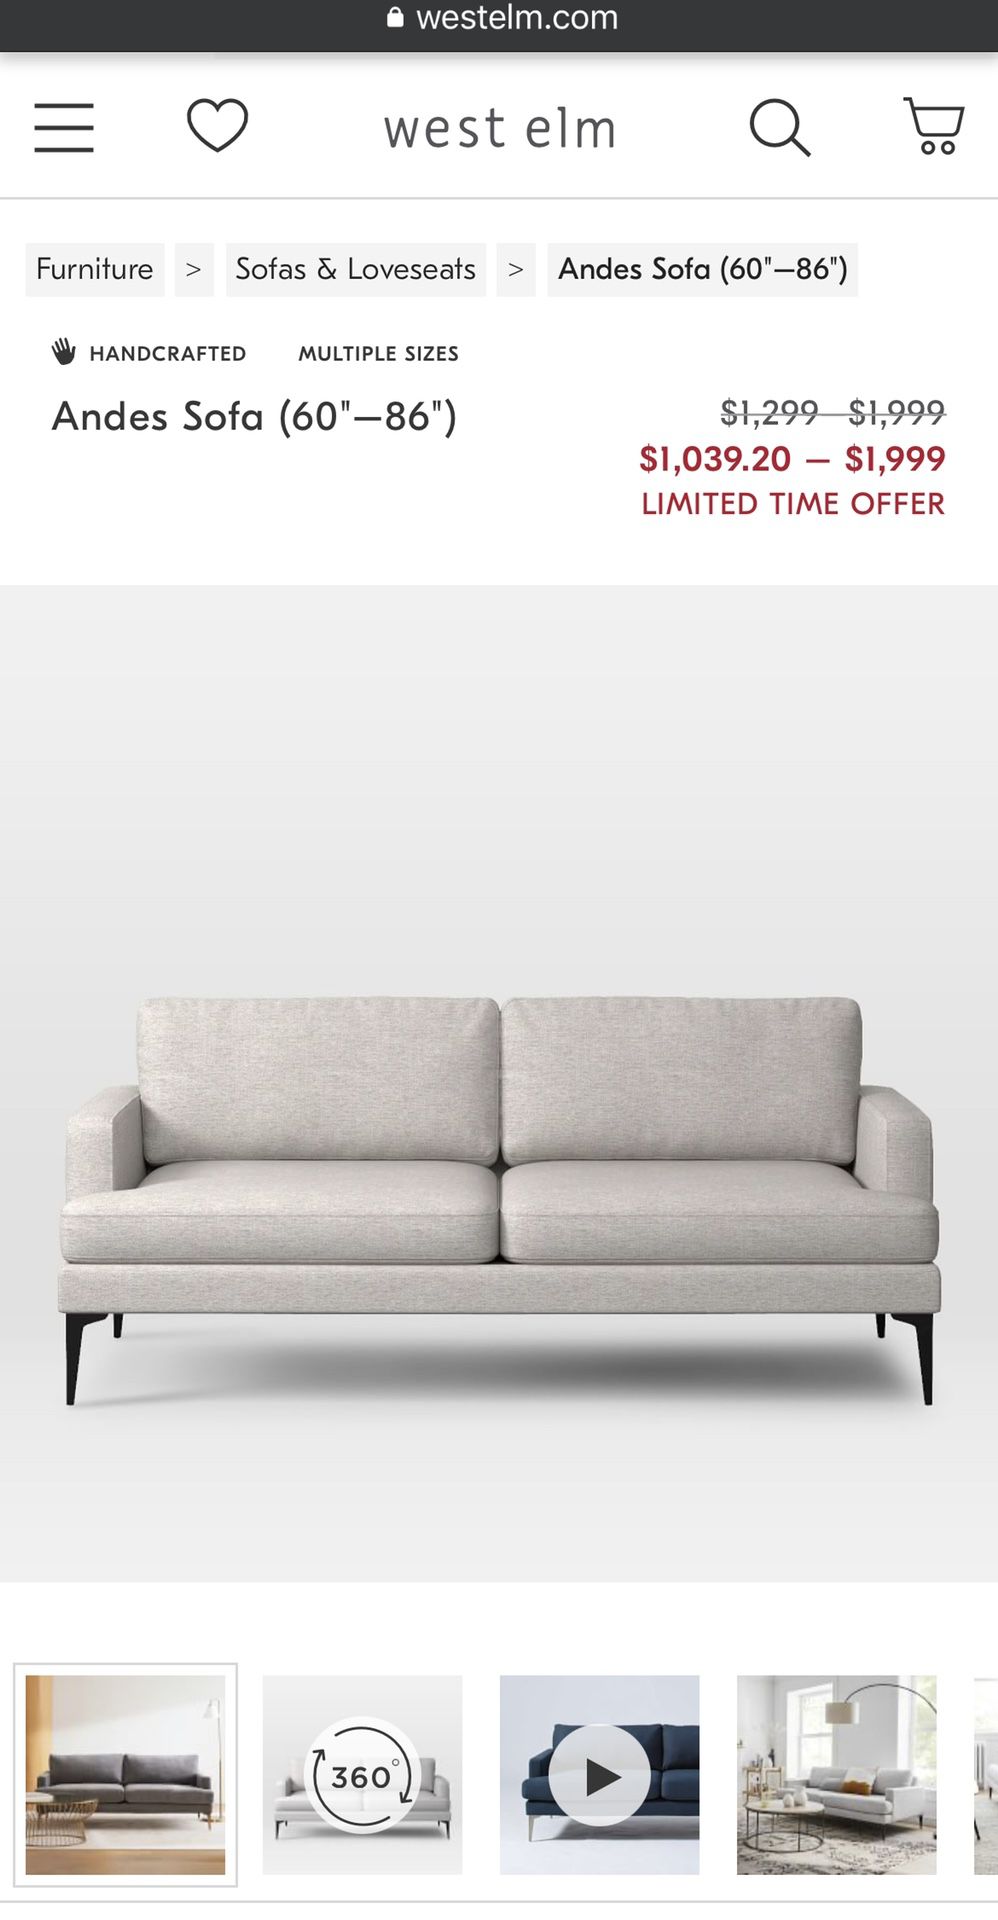 Andes Sofa (60–86)